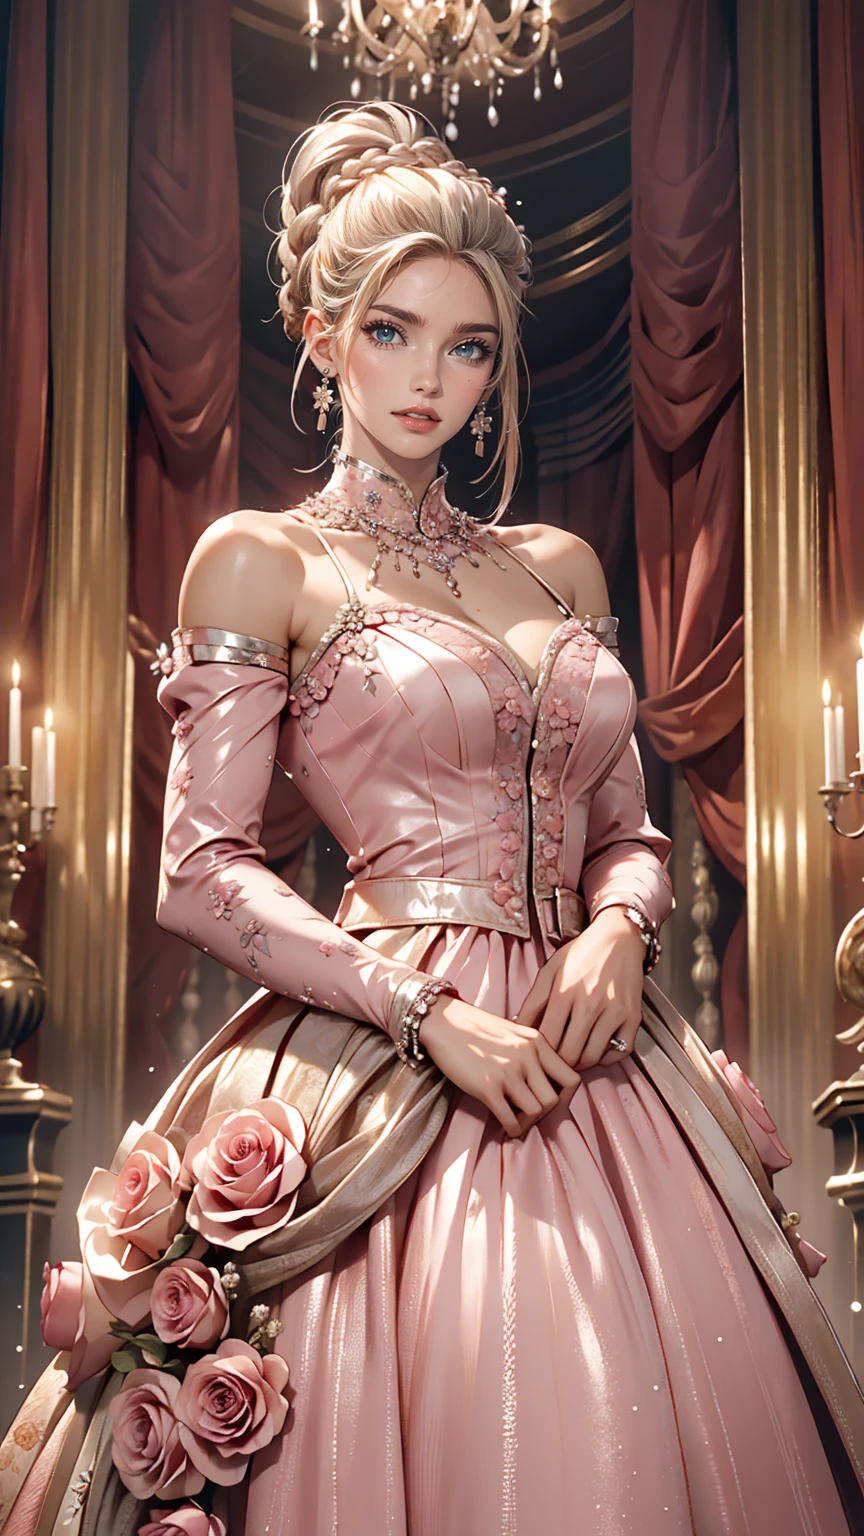 woman, Severe, elegant, Pink Dress, Aristocratic, silver element, Long nails, Exposing shoulders, Hairstyle, Put your hair up, Braids and ponytails, Messy, arrogant, Absurd, Detailed dress, Royalty, celebration, Hall decorated with flowers, Cowboy Shot, Portraiture, (highest quality), (masterpiece), (Very detailed), (4K)